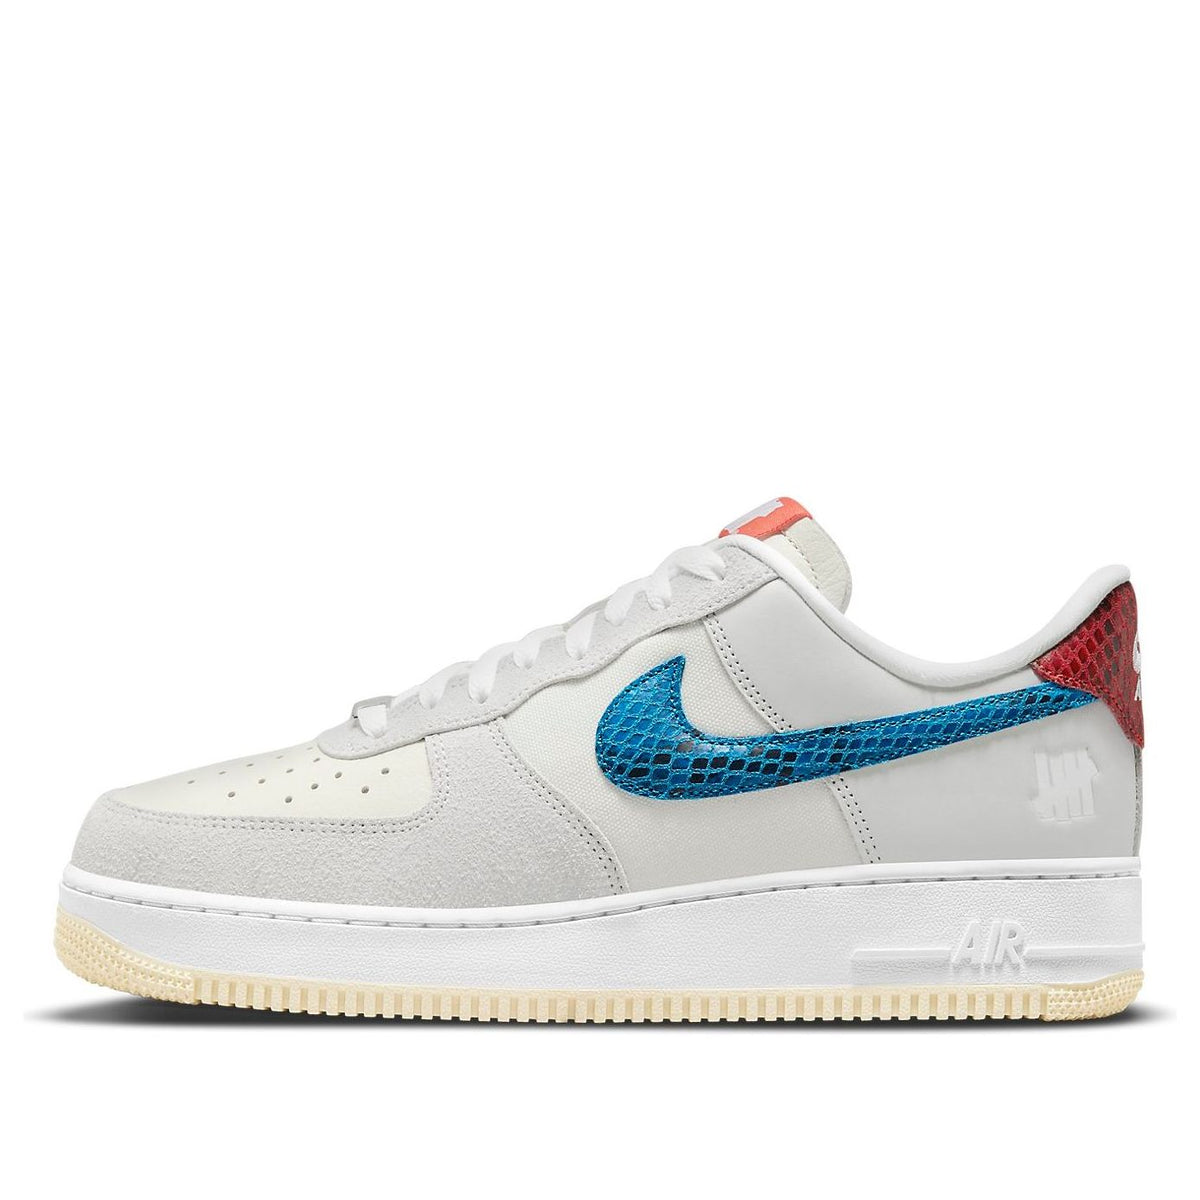 Nike Undefeated x Air Force 1 Low '5 On It' DM8461-001 - KICKS CREW